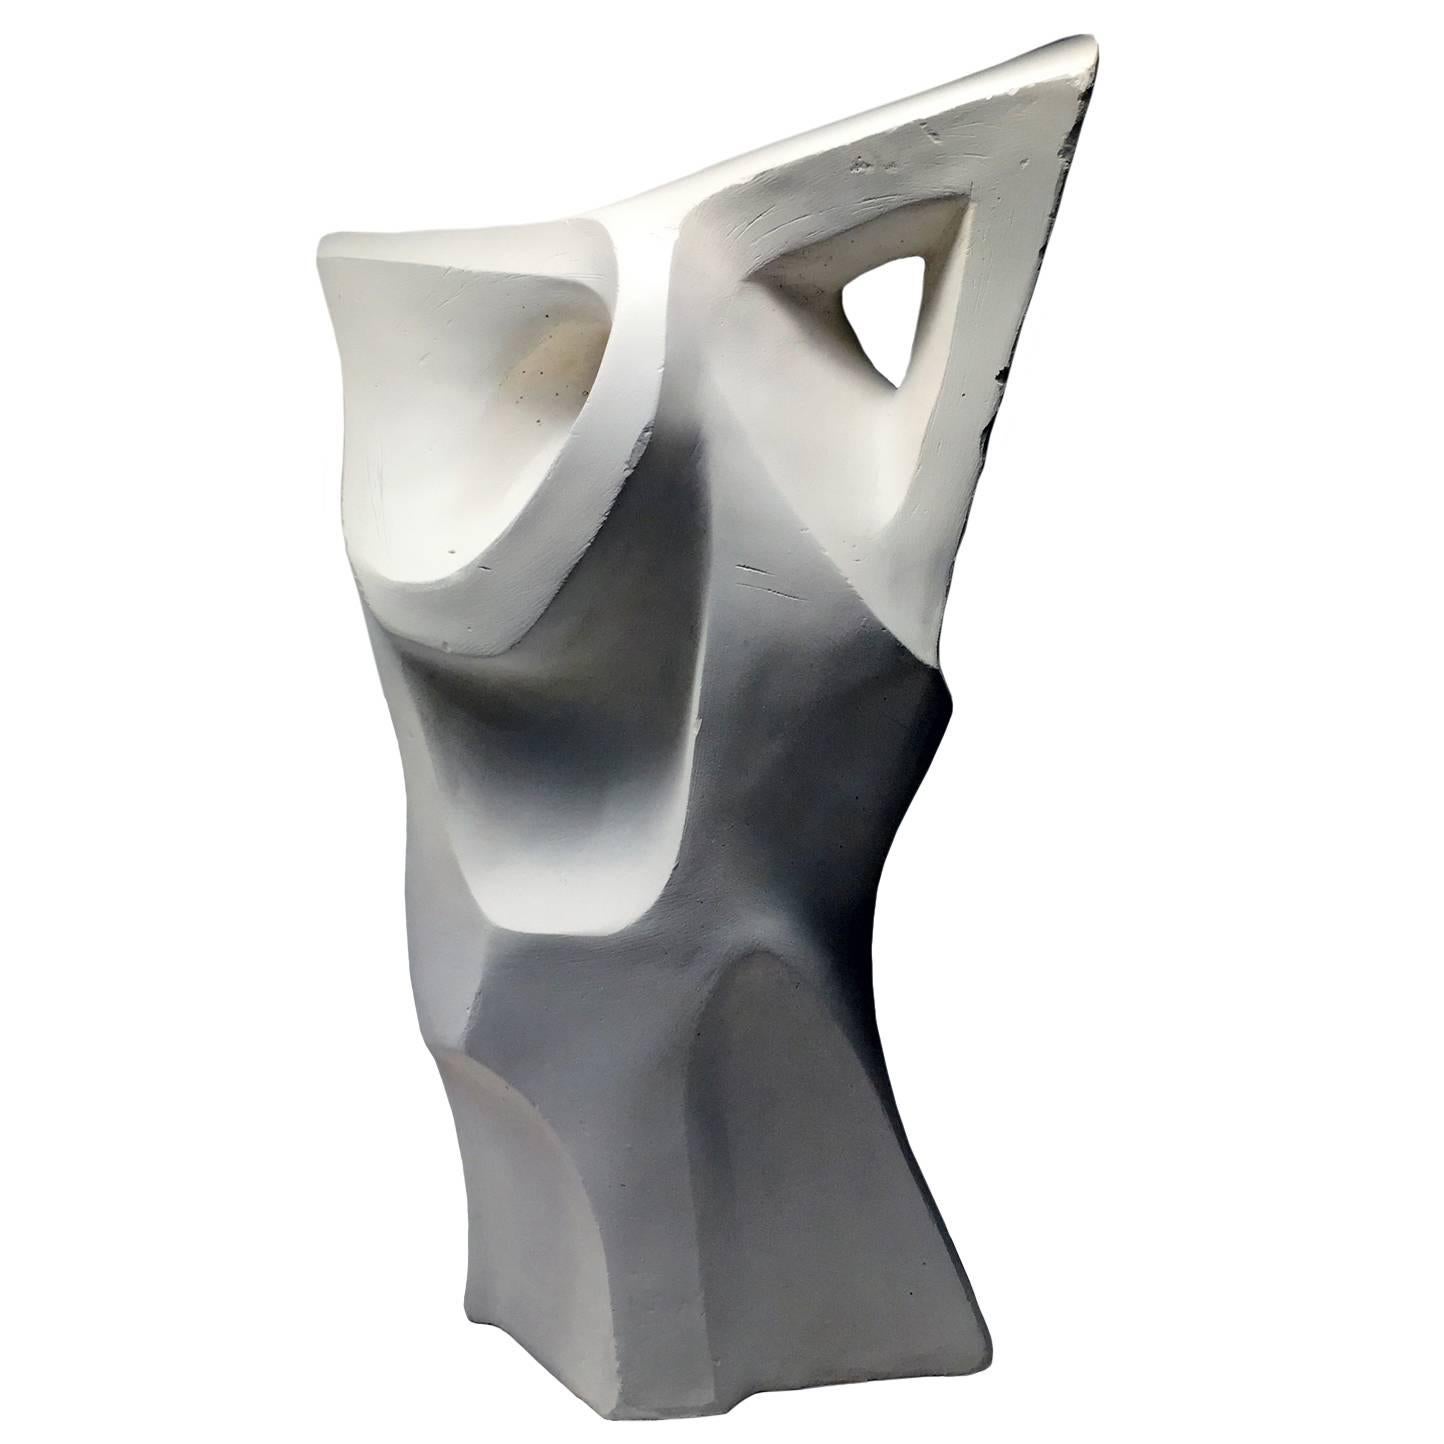 "Plaster Maquette #3" by Seymour Meyer